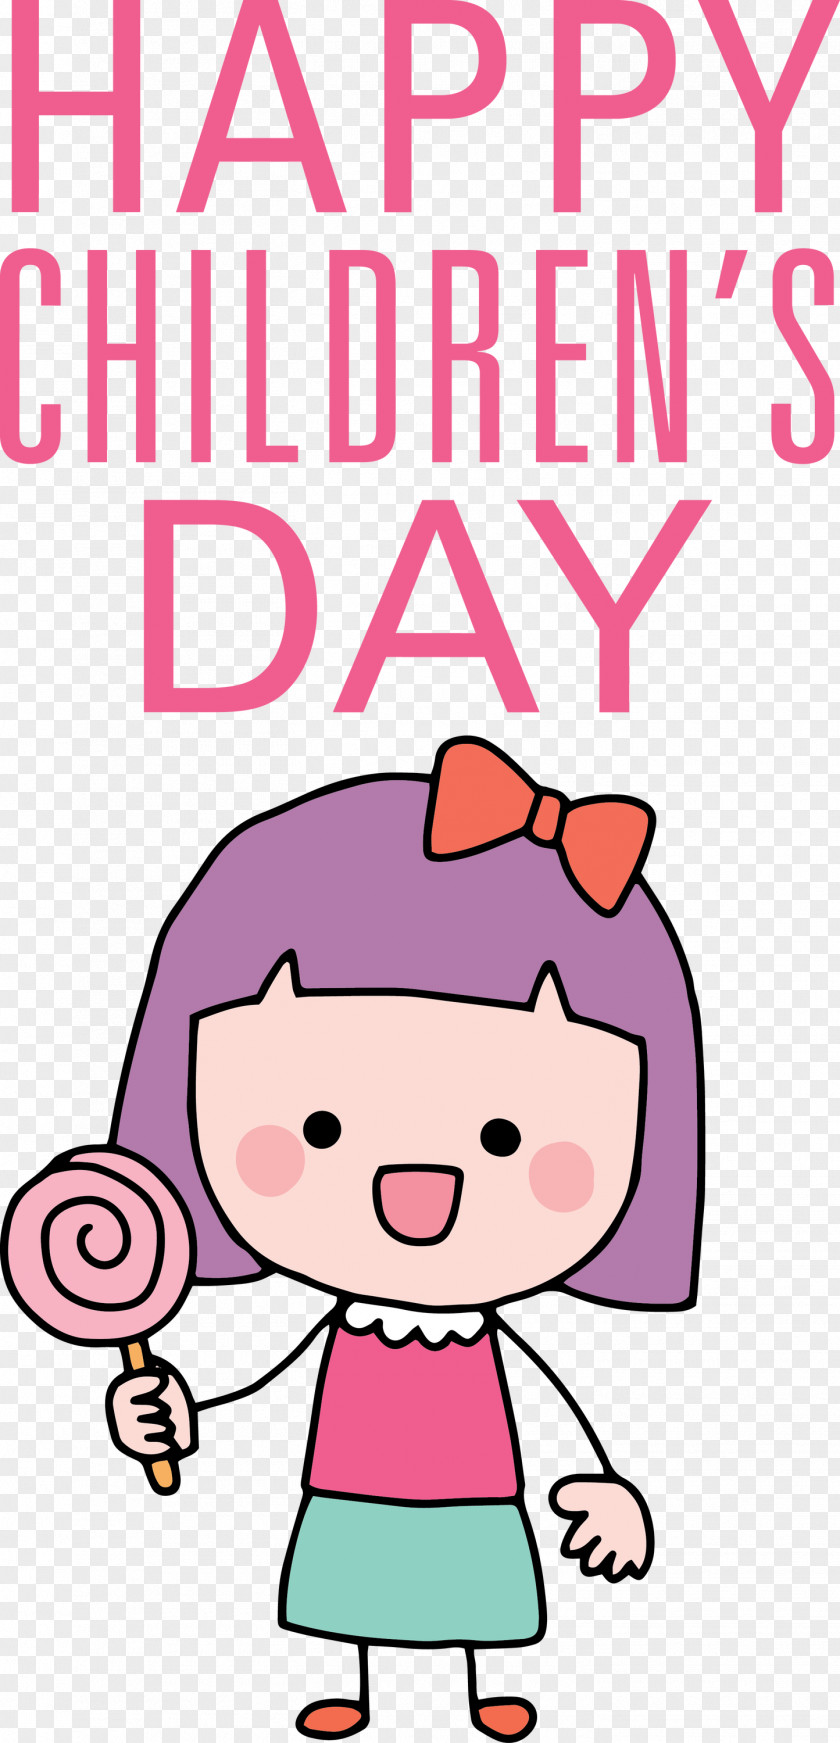 Cute Childrens Day Banner PNG